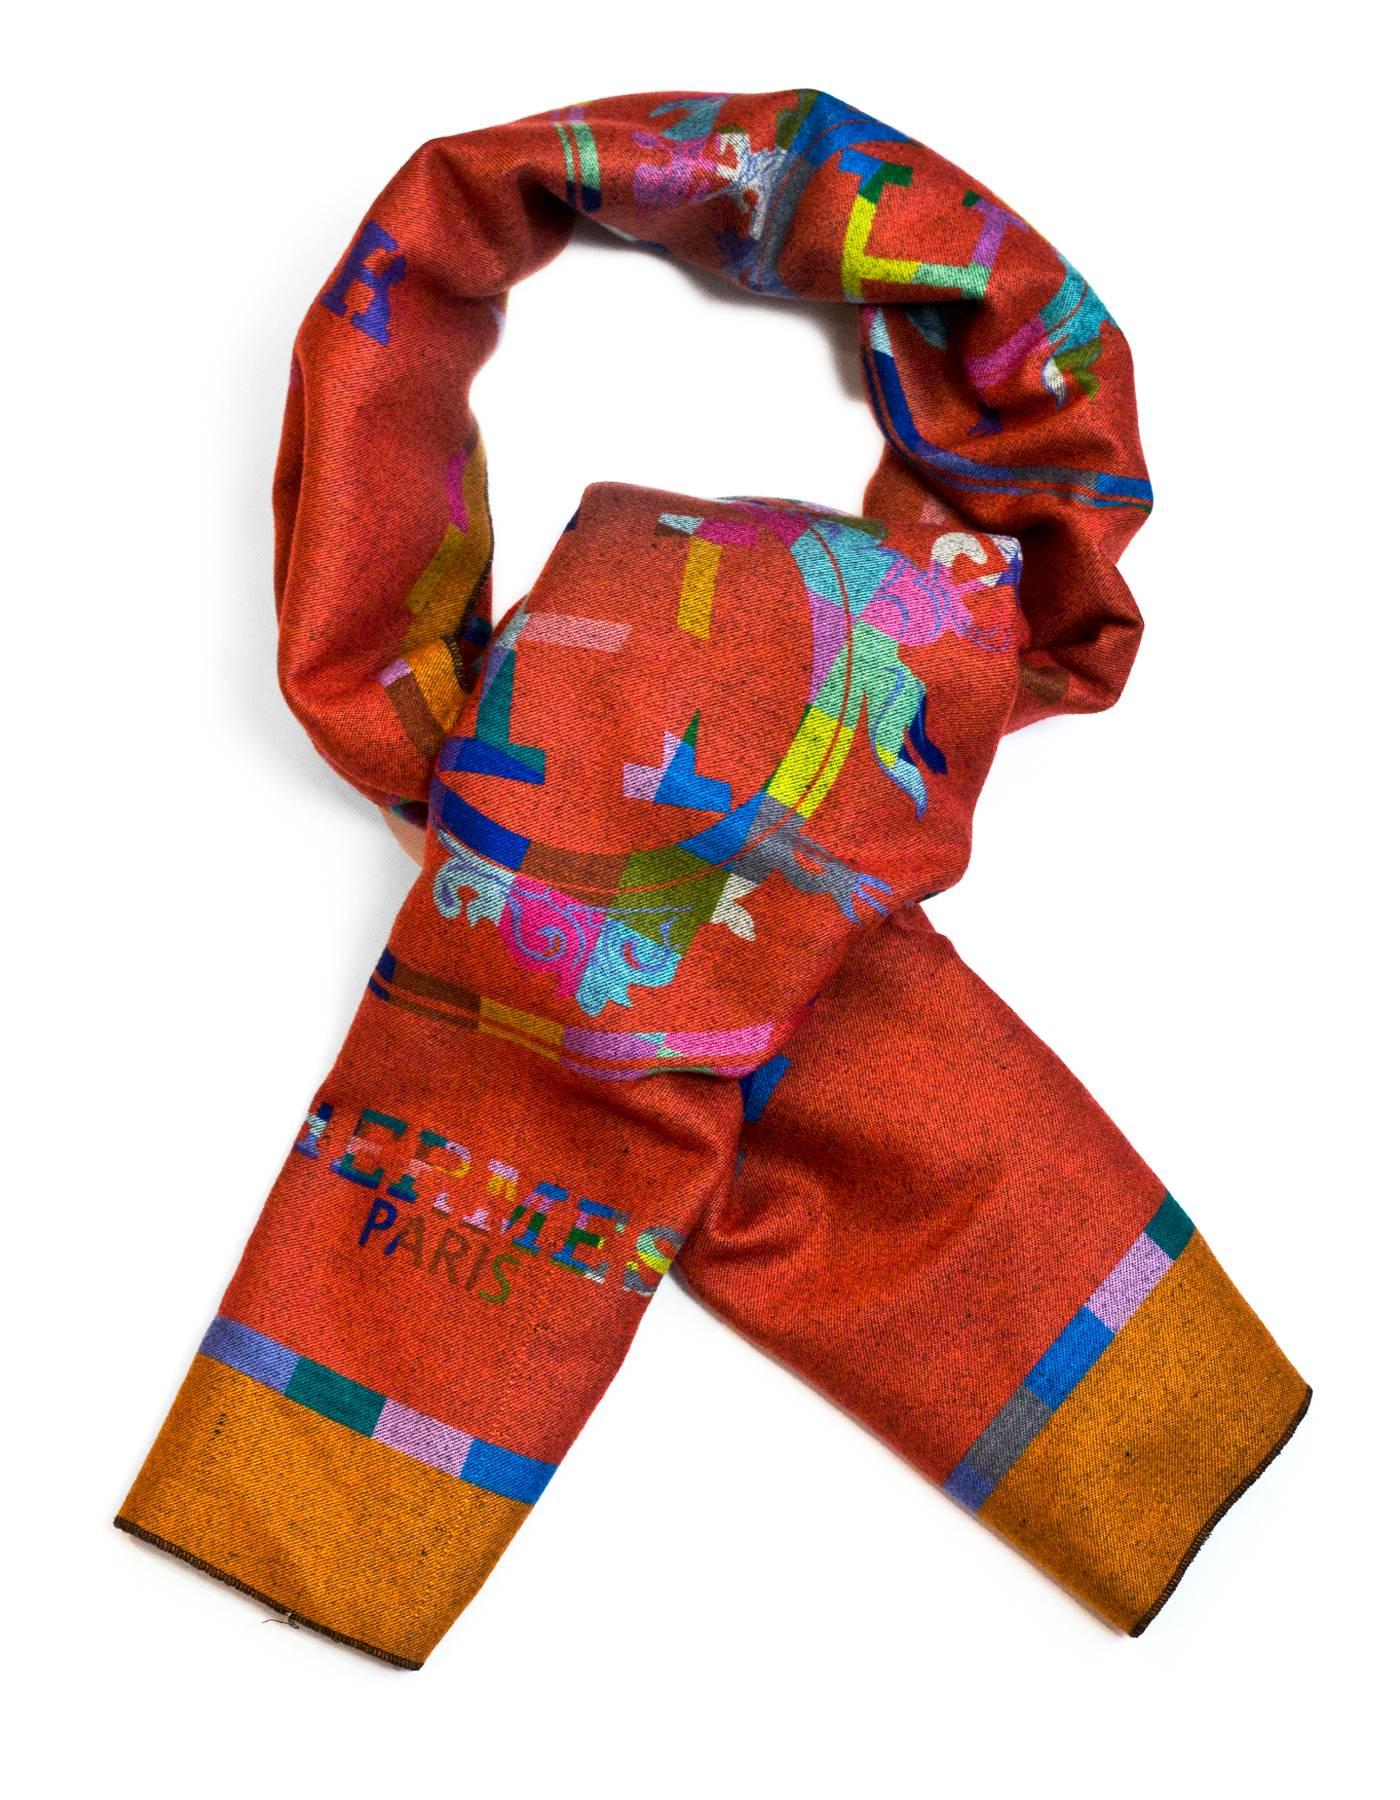 Hermes H Print Scarf
Features multicolor H print on one side, and solid black on reverse.

Color: Rust, black, multi colored
Composition: Not listed, feels like cashmere blend
Overall Condition: Excellent pre-owned condition, slight pulling at